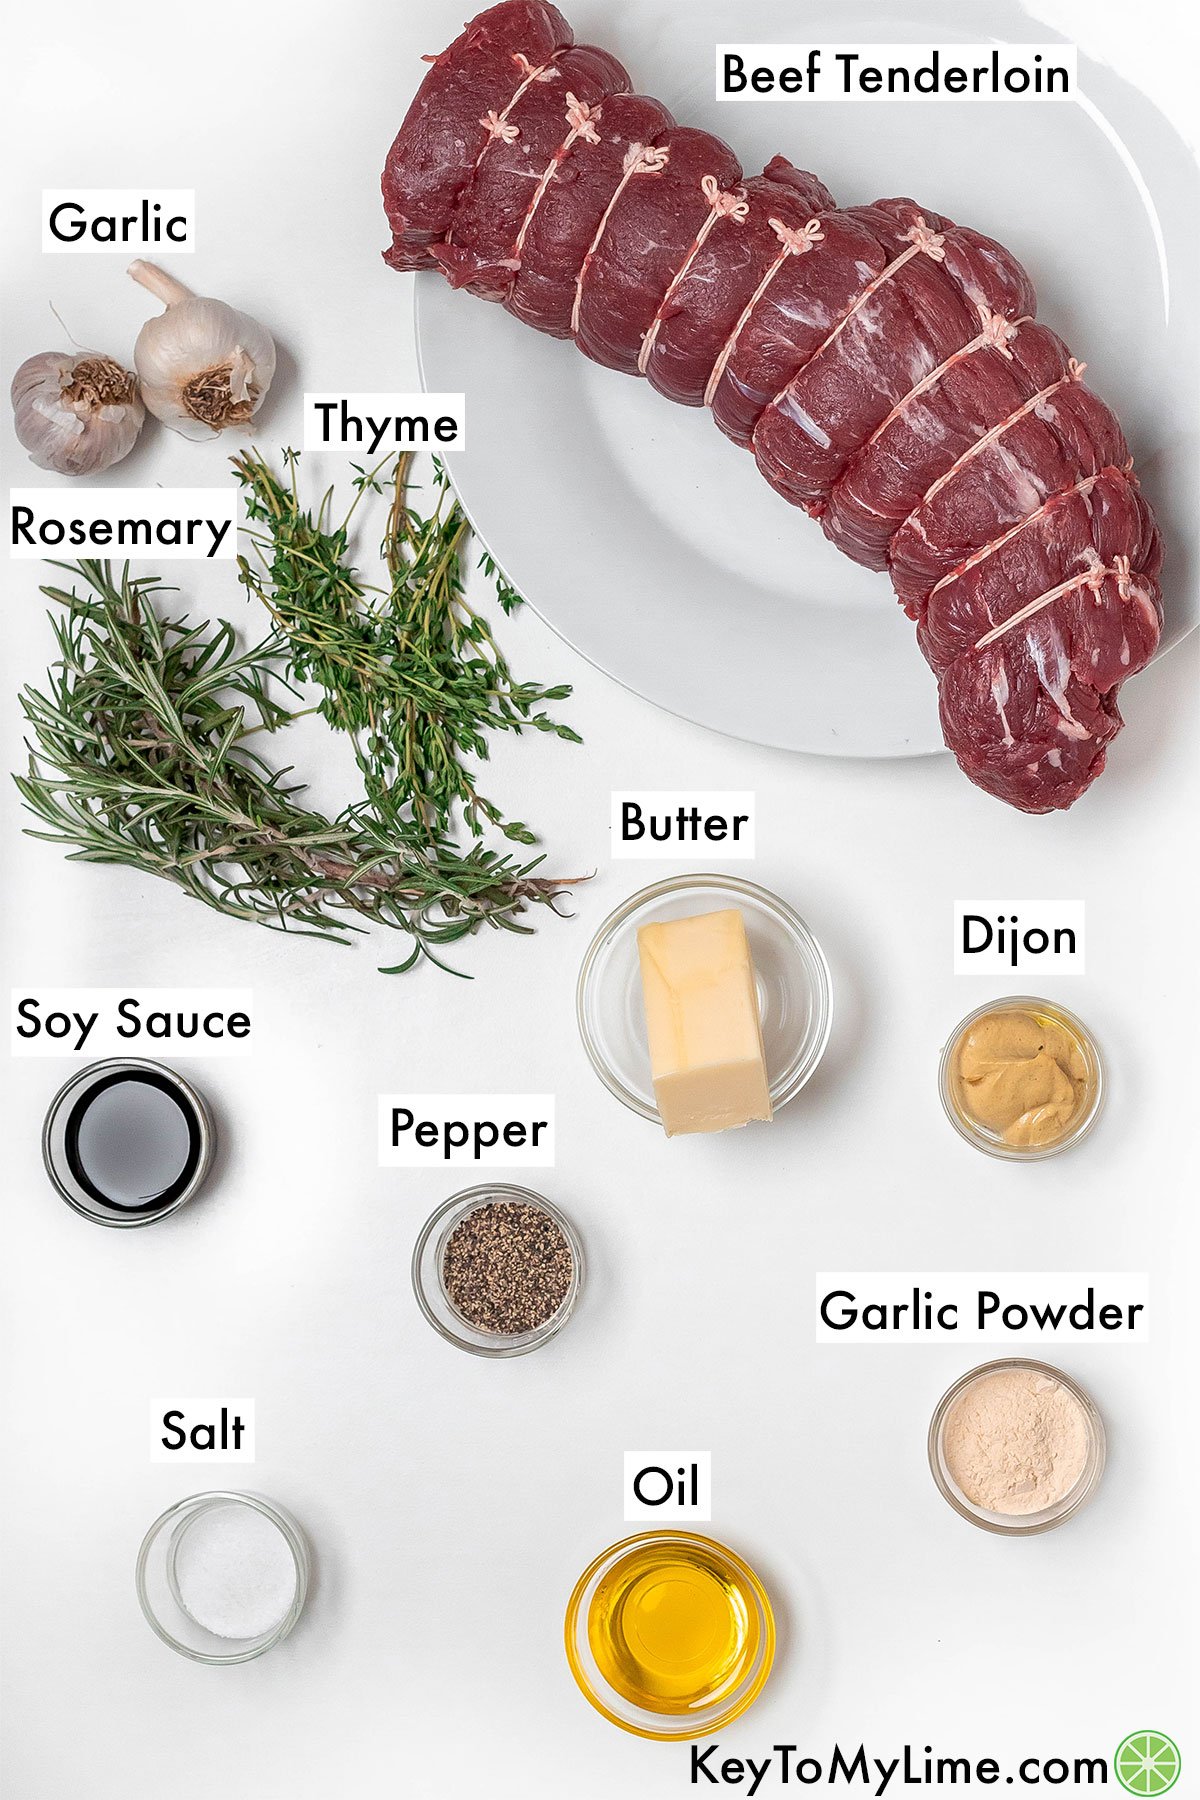 The labeled ingredients for sous vide beef tenderloin.